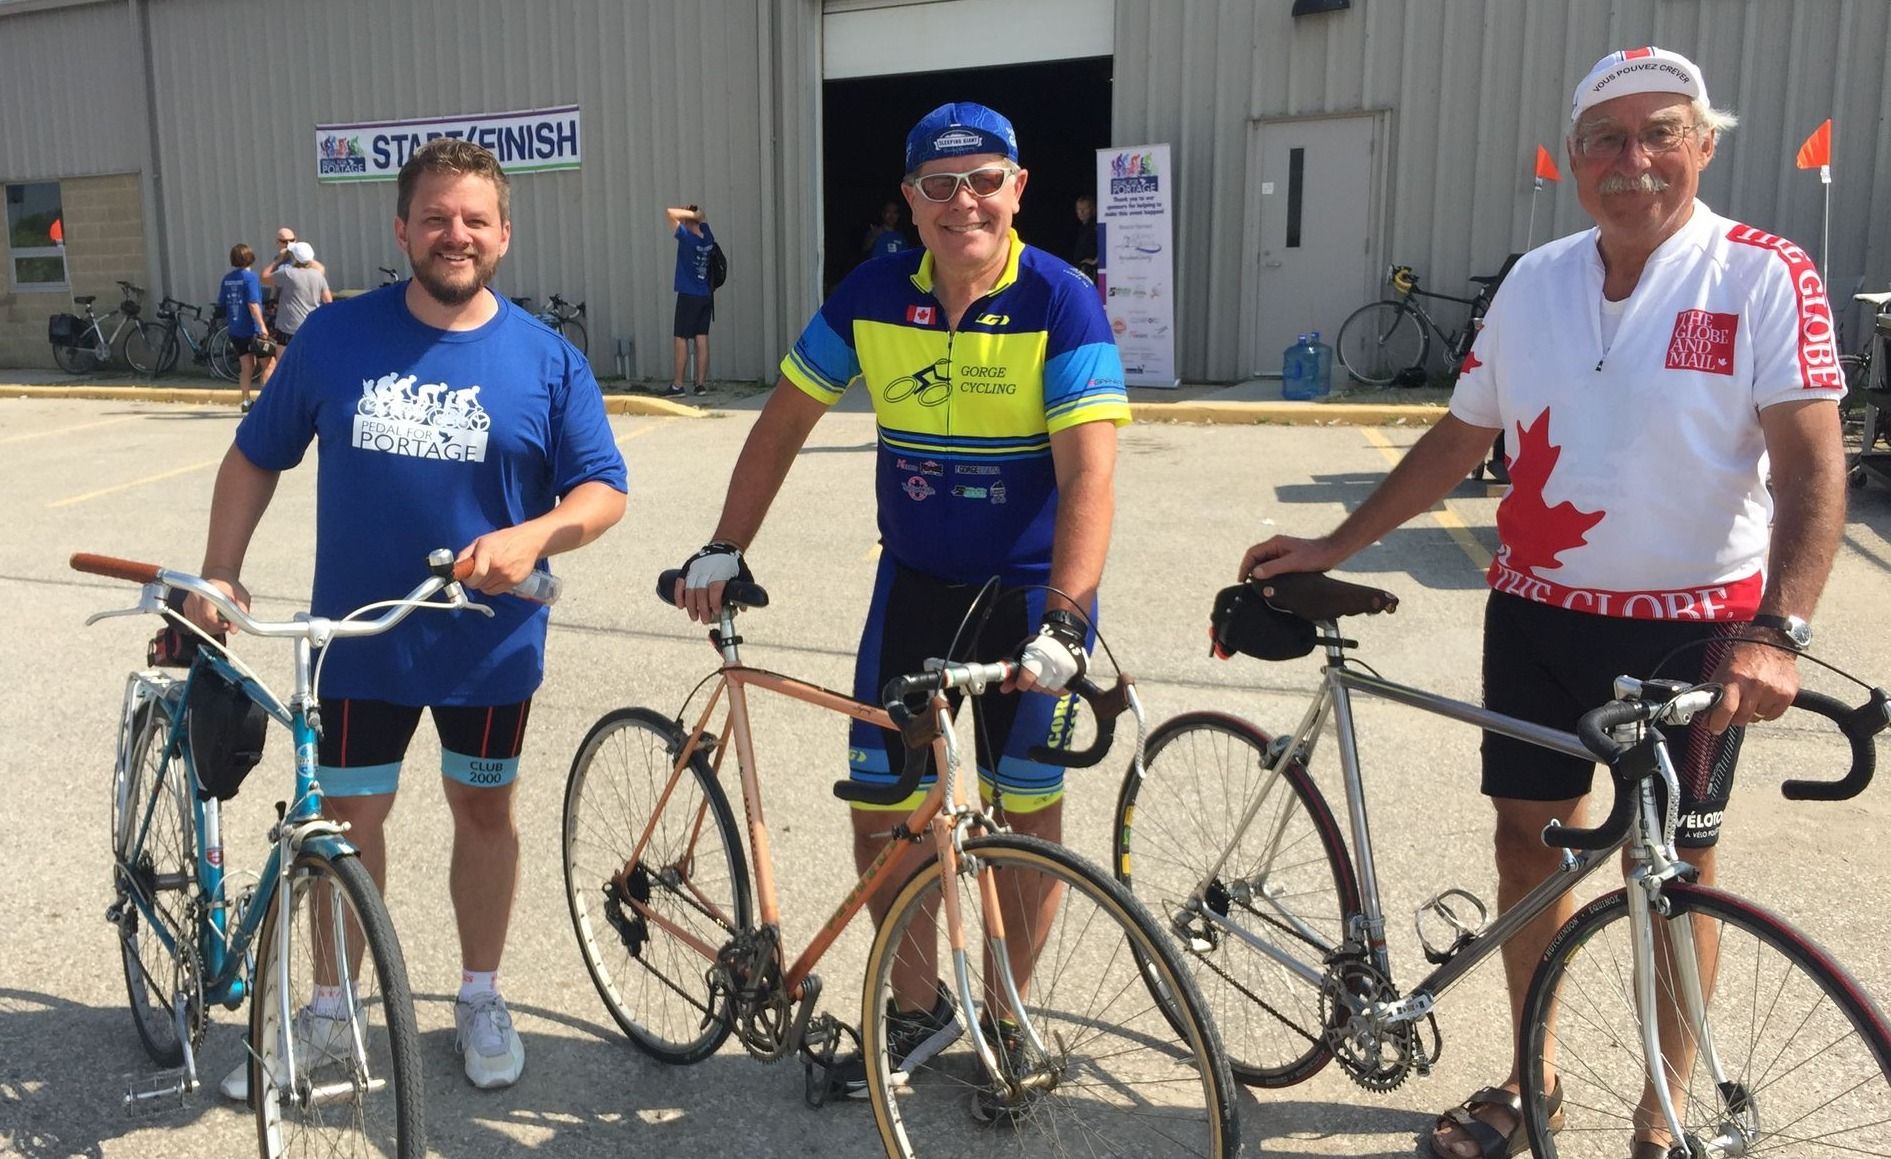                      Bike ride a chance to raise funds, talk about teen substance use                             
                     